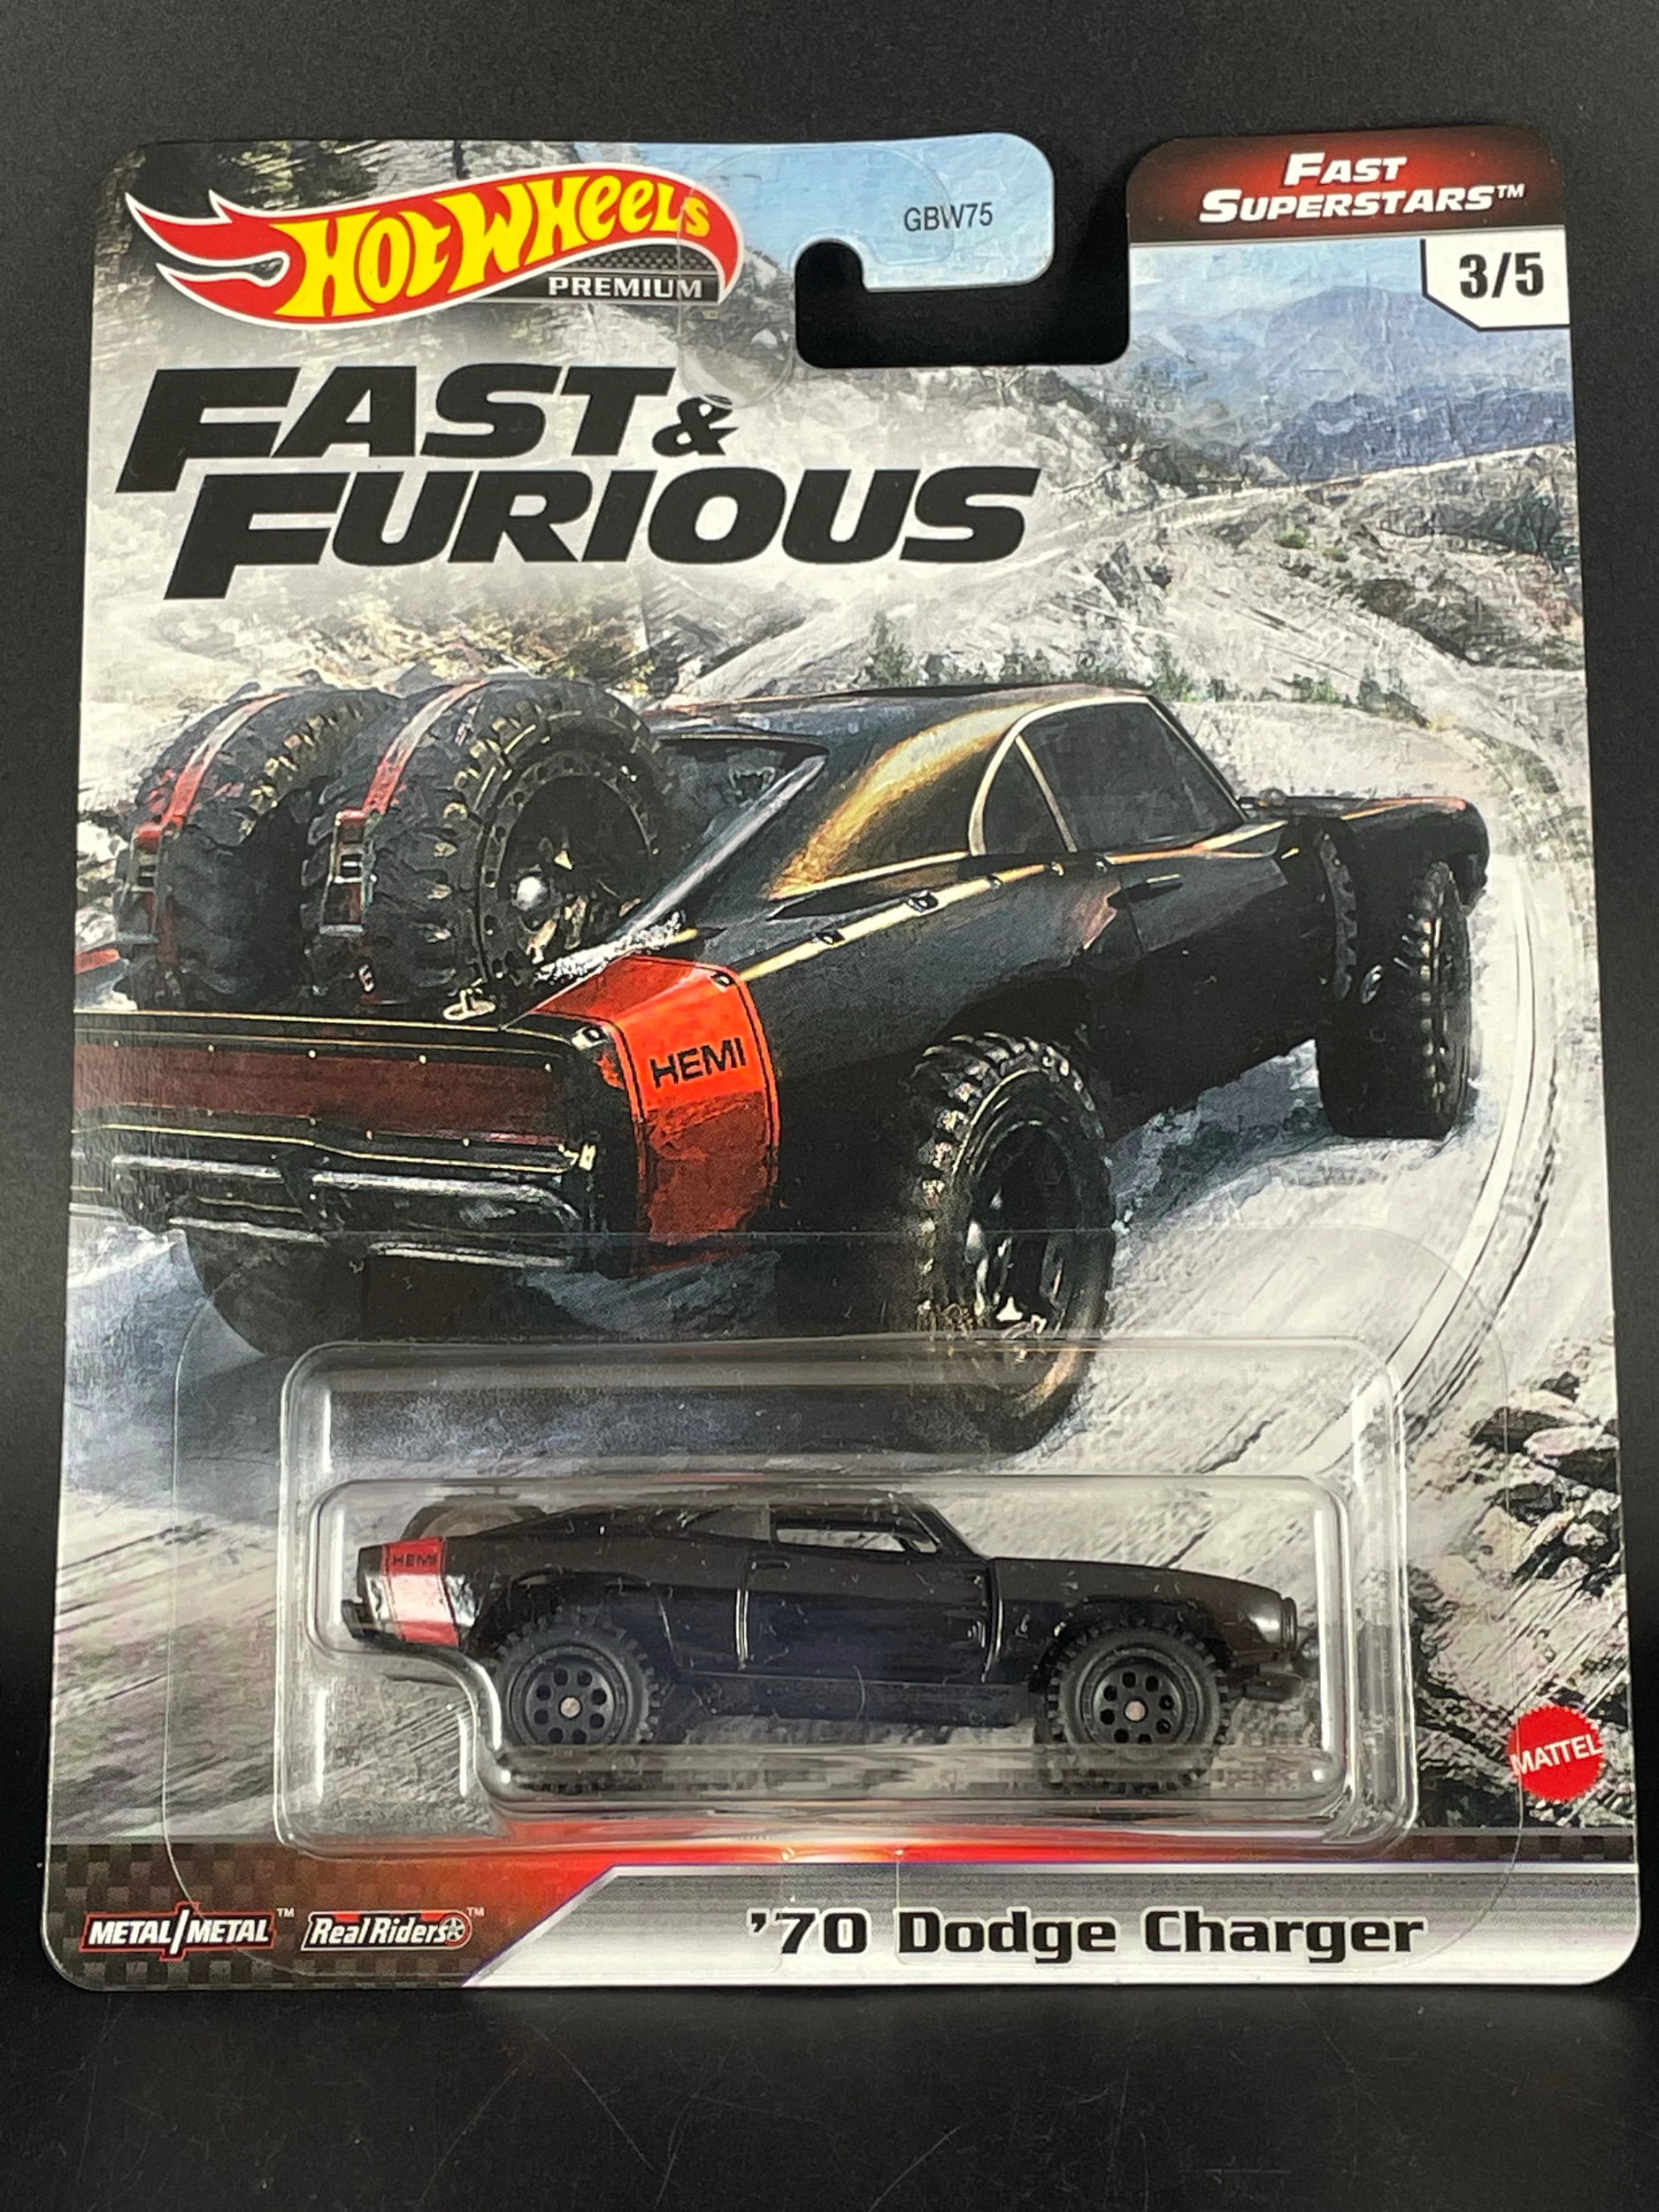 HOTWHEELS FAST & FURIOUS FULL FORCE  70 DODGE CHARGER RT  ALLOYS RUBBER TYRES 